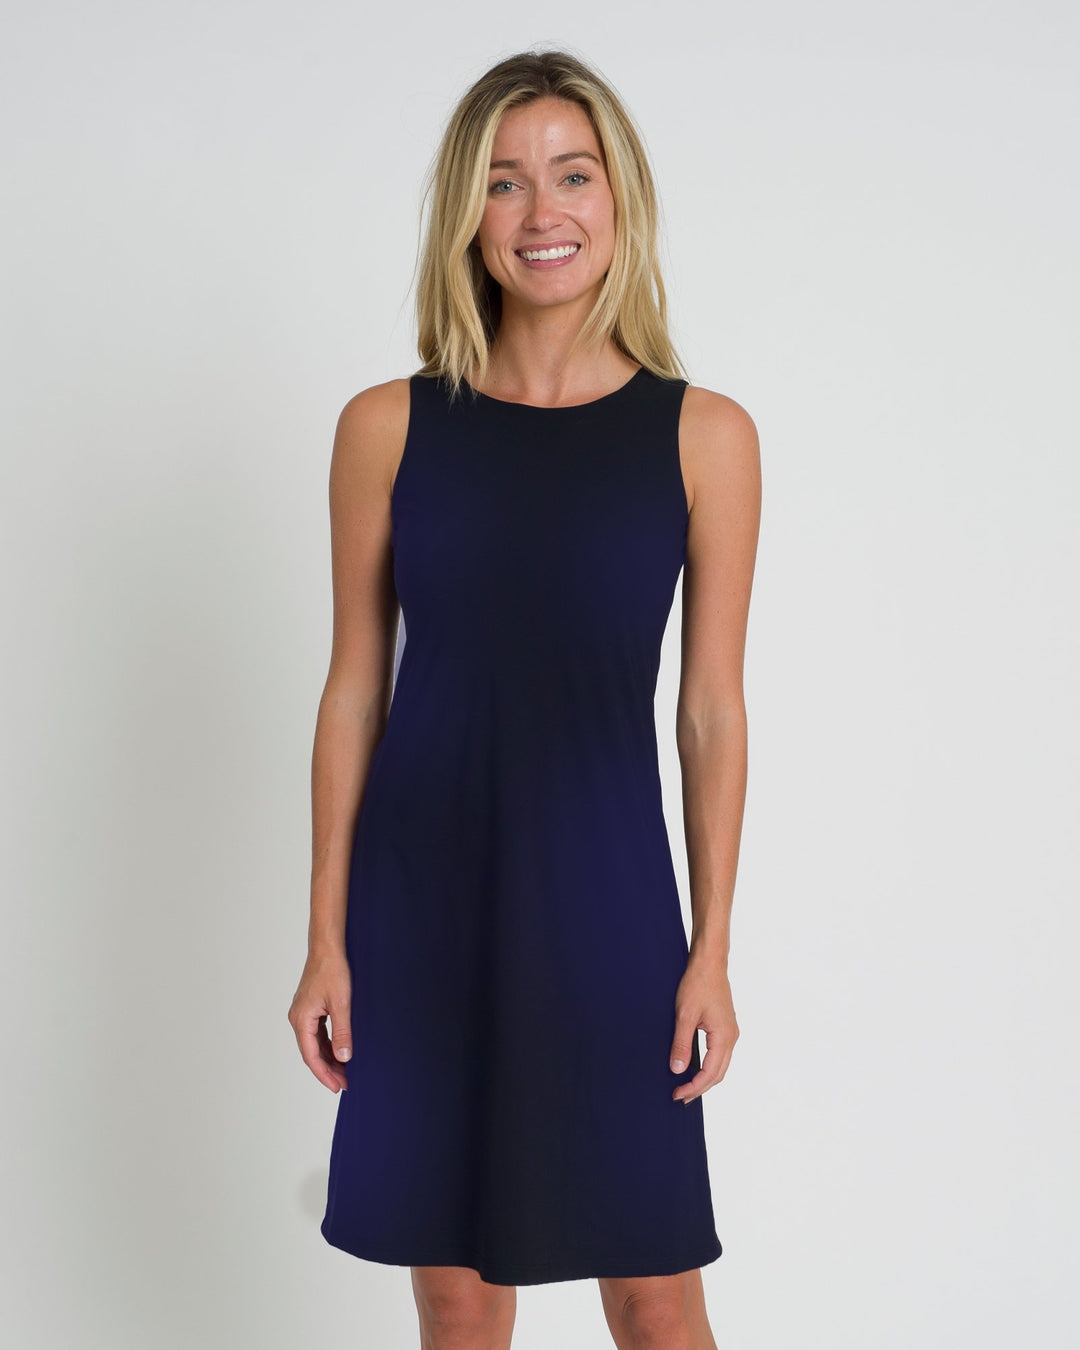 Jude Connally - Beth Dress Long in Jude Cloth: Navy - Shorely Chic Boutique